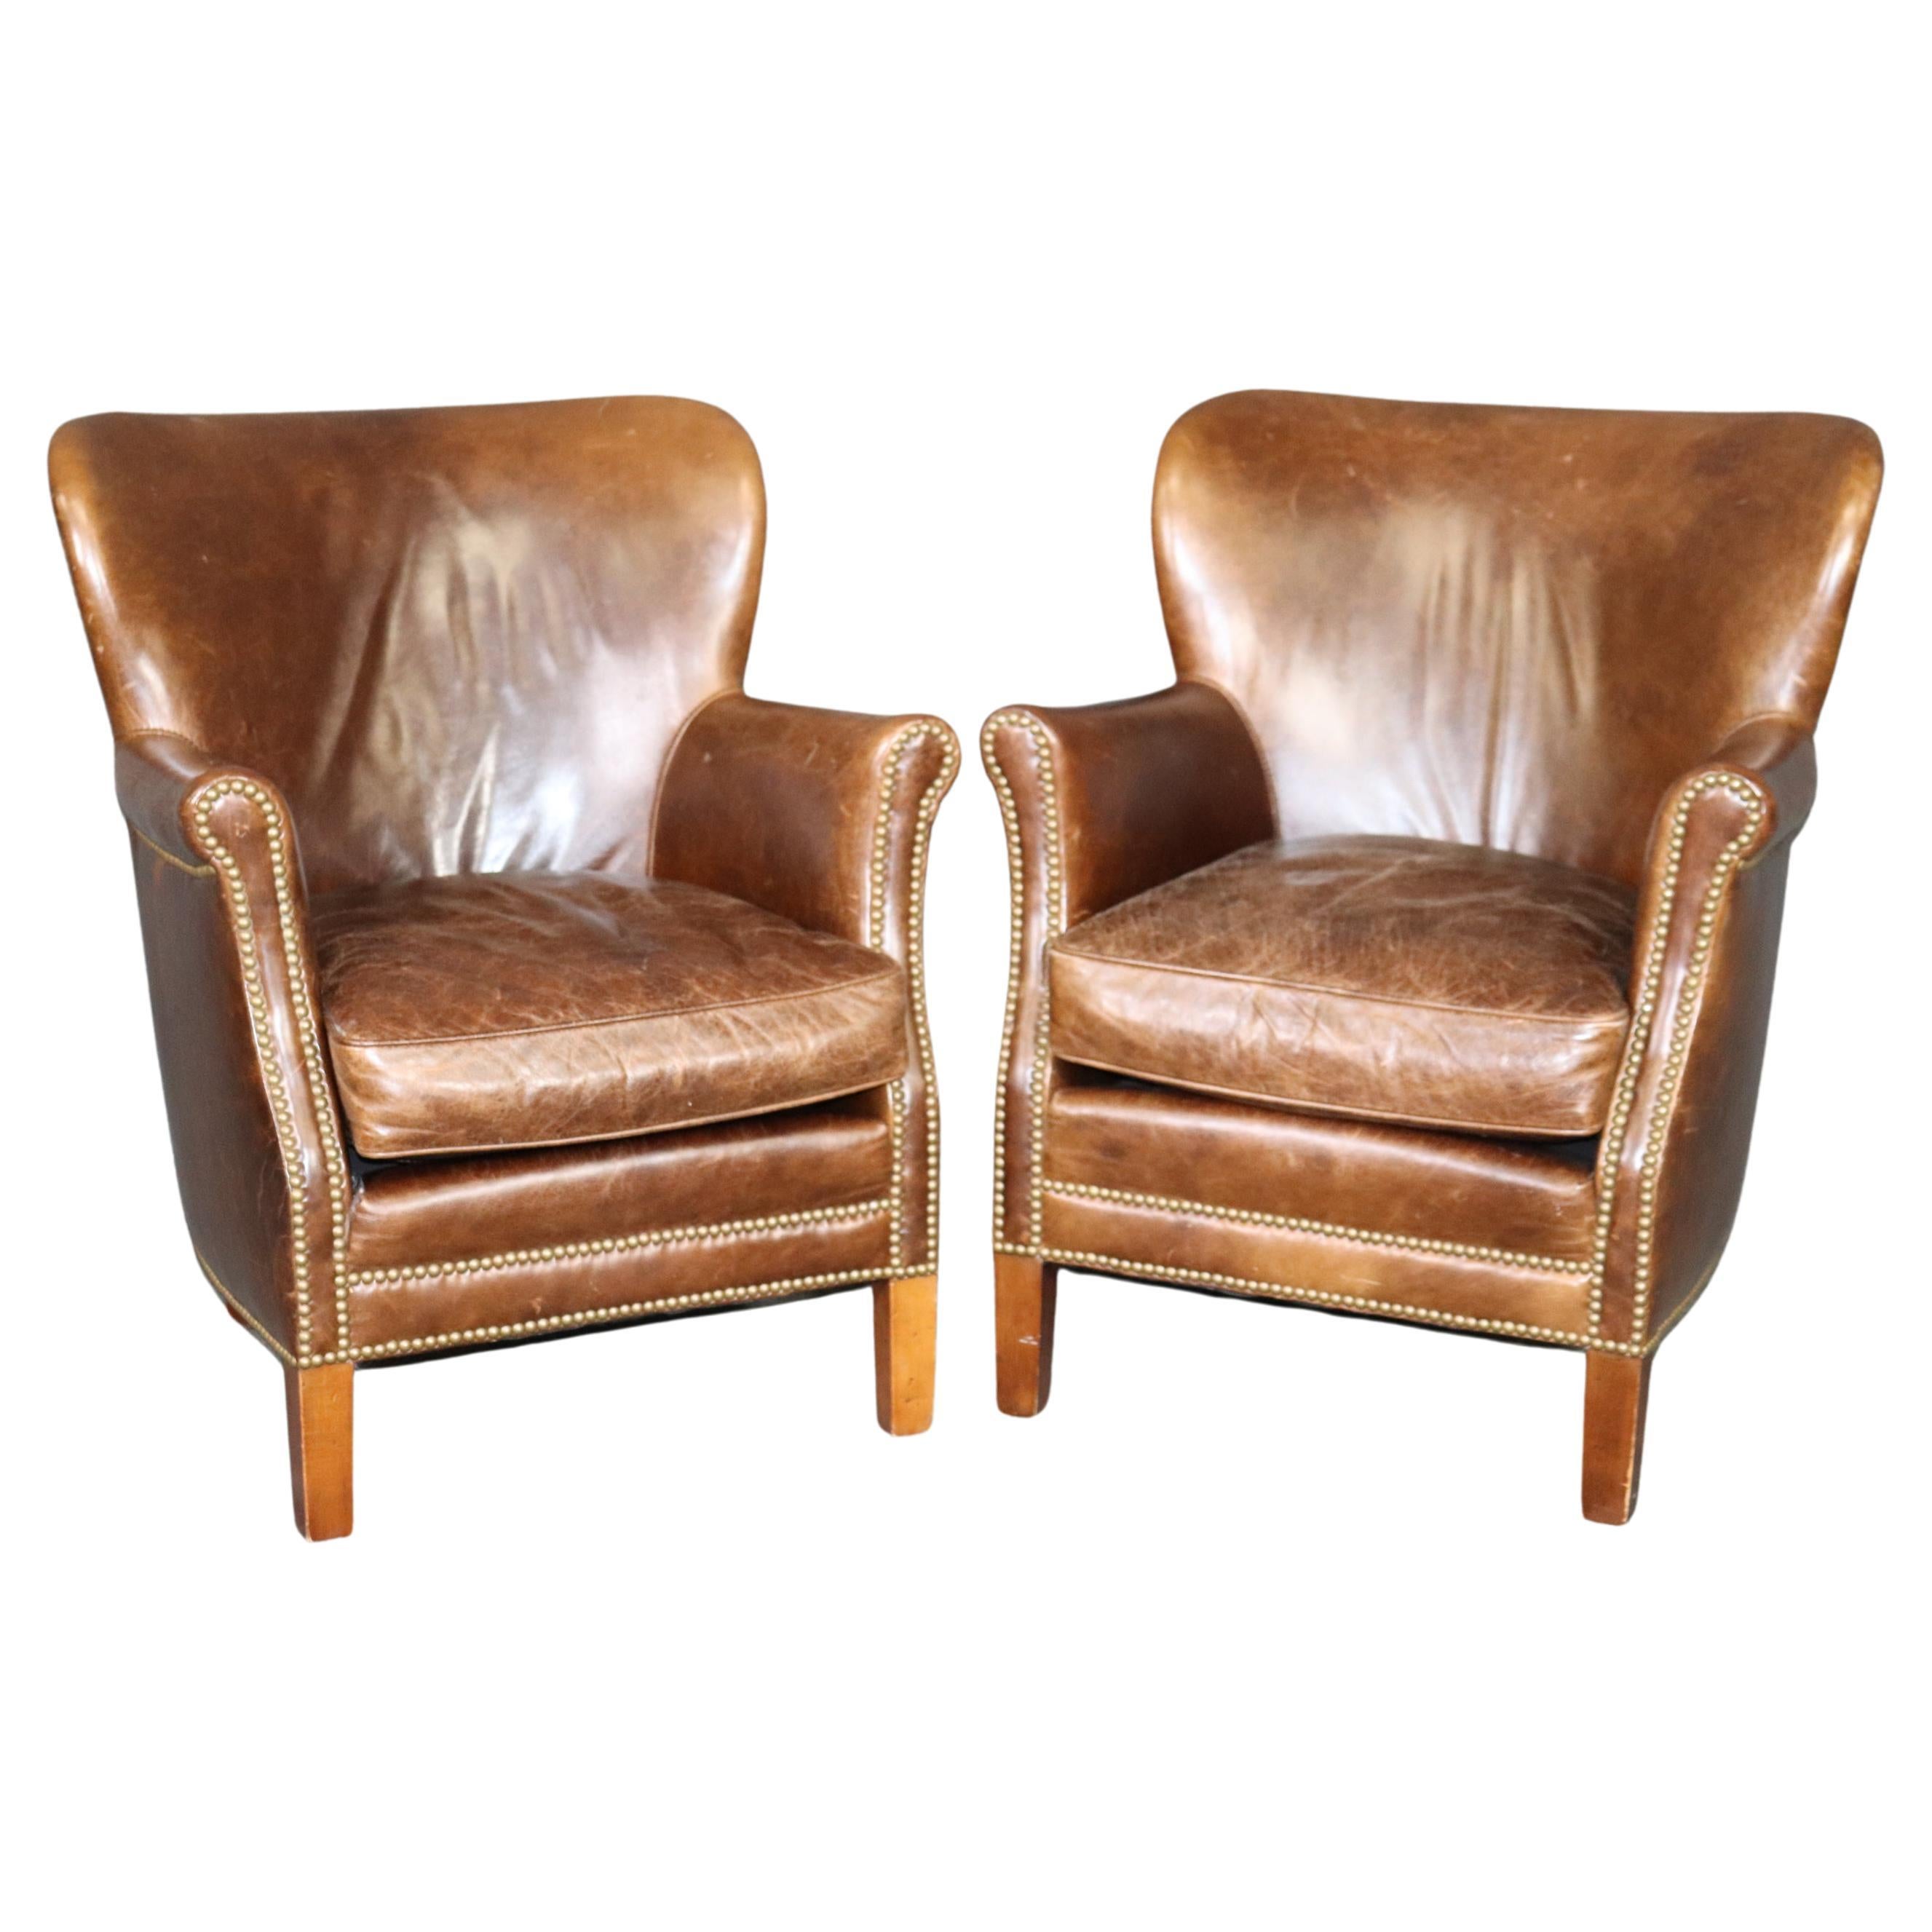 Pair of Antiqued Aged Leather English Georgian Pub Style Club Lounge Chairs